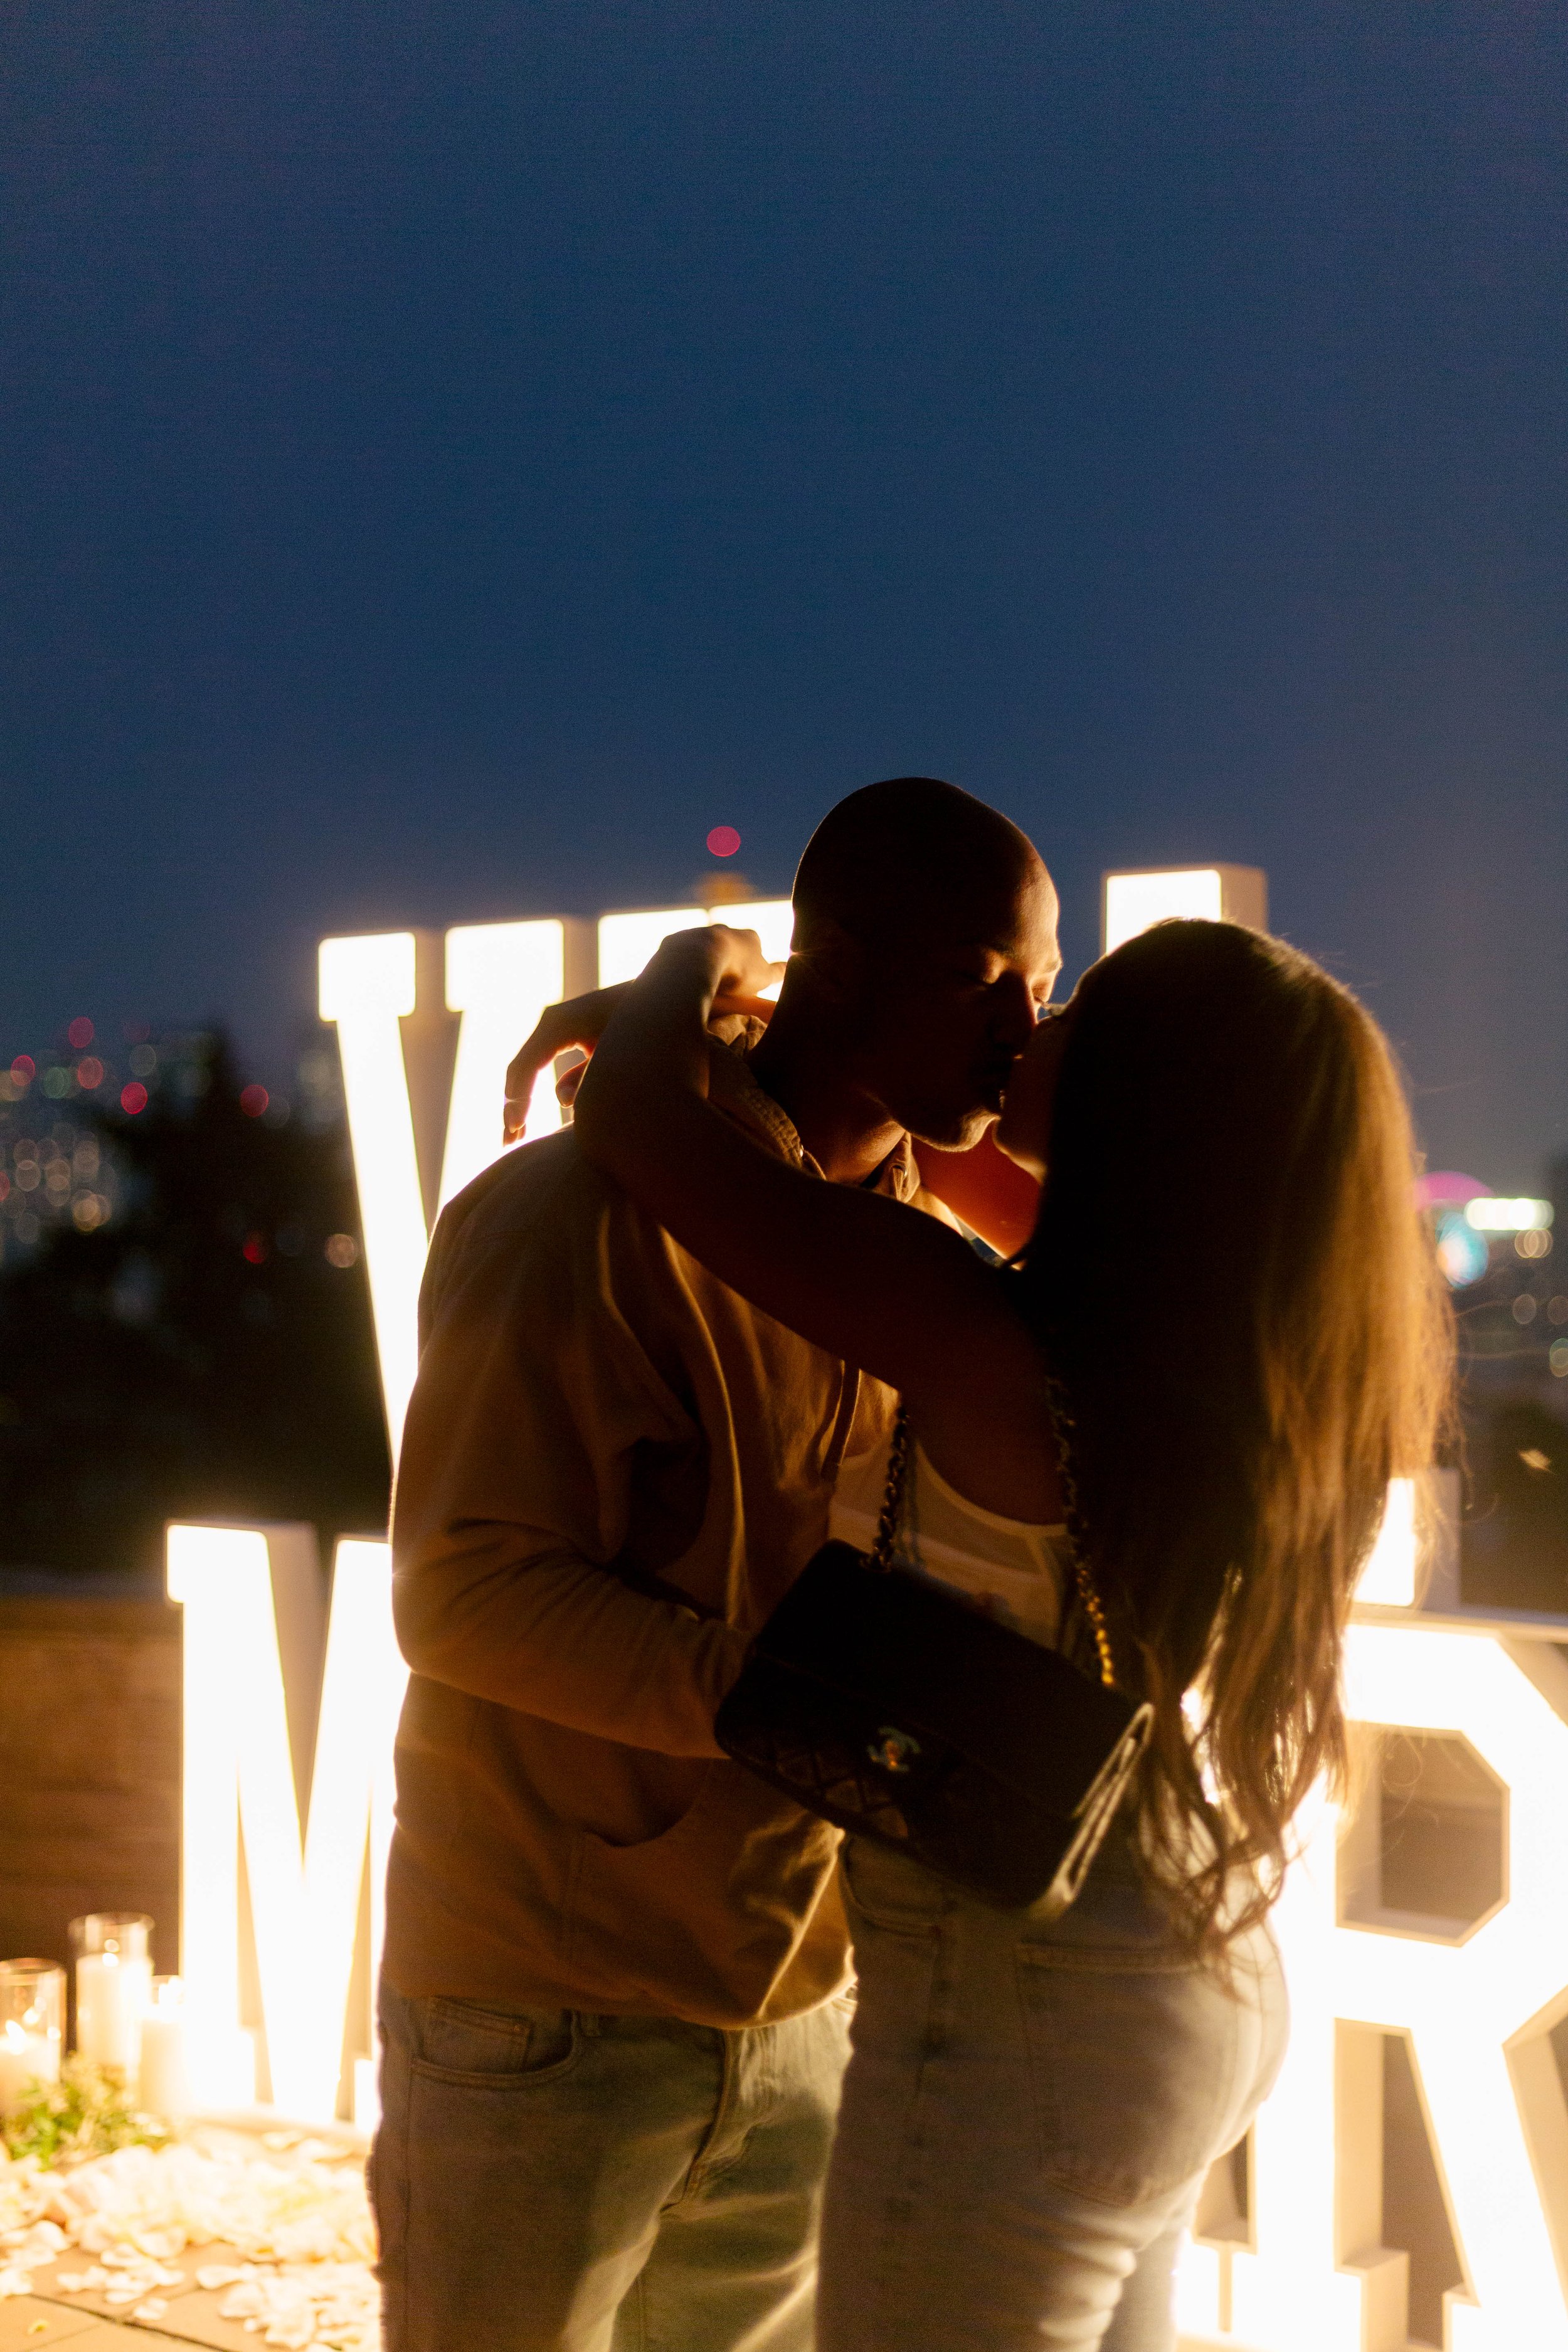 pacific-engagements-wedding-planning-and-design-seattle-seahawk-tyler-lockett-engaged-to-lauren-jackson-kerry-park-kerry-jeanne-photography-a-to-z-marquee-letter-rental